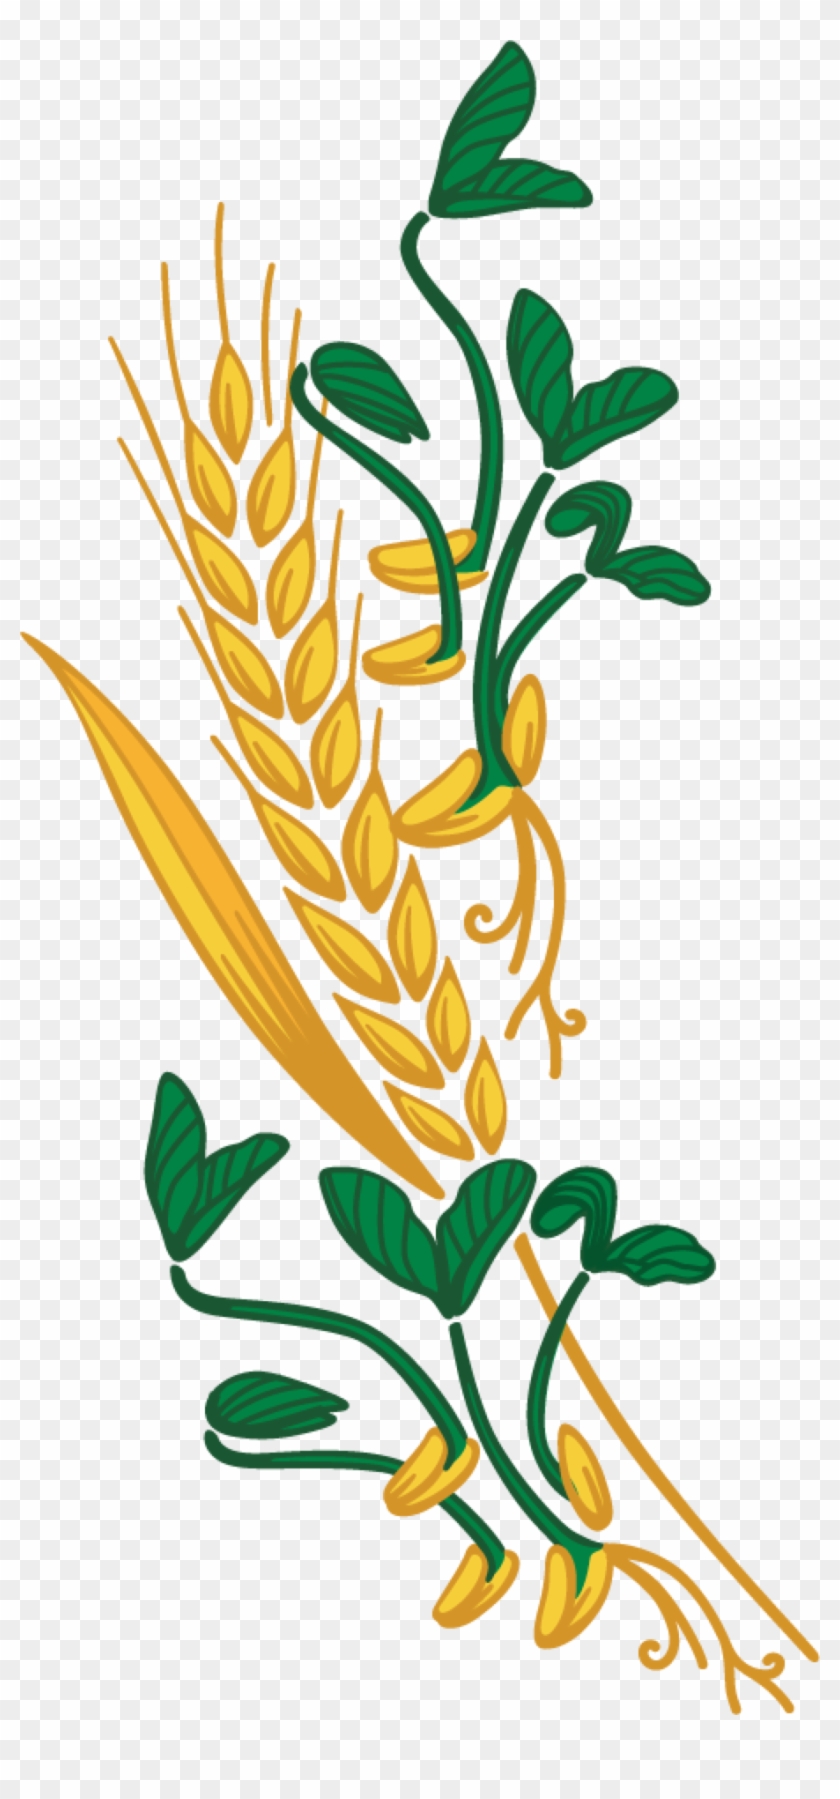 Sprouted Grains Clipart Clipground - Harvest #700172